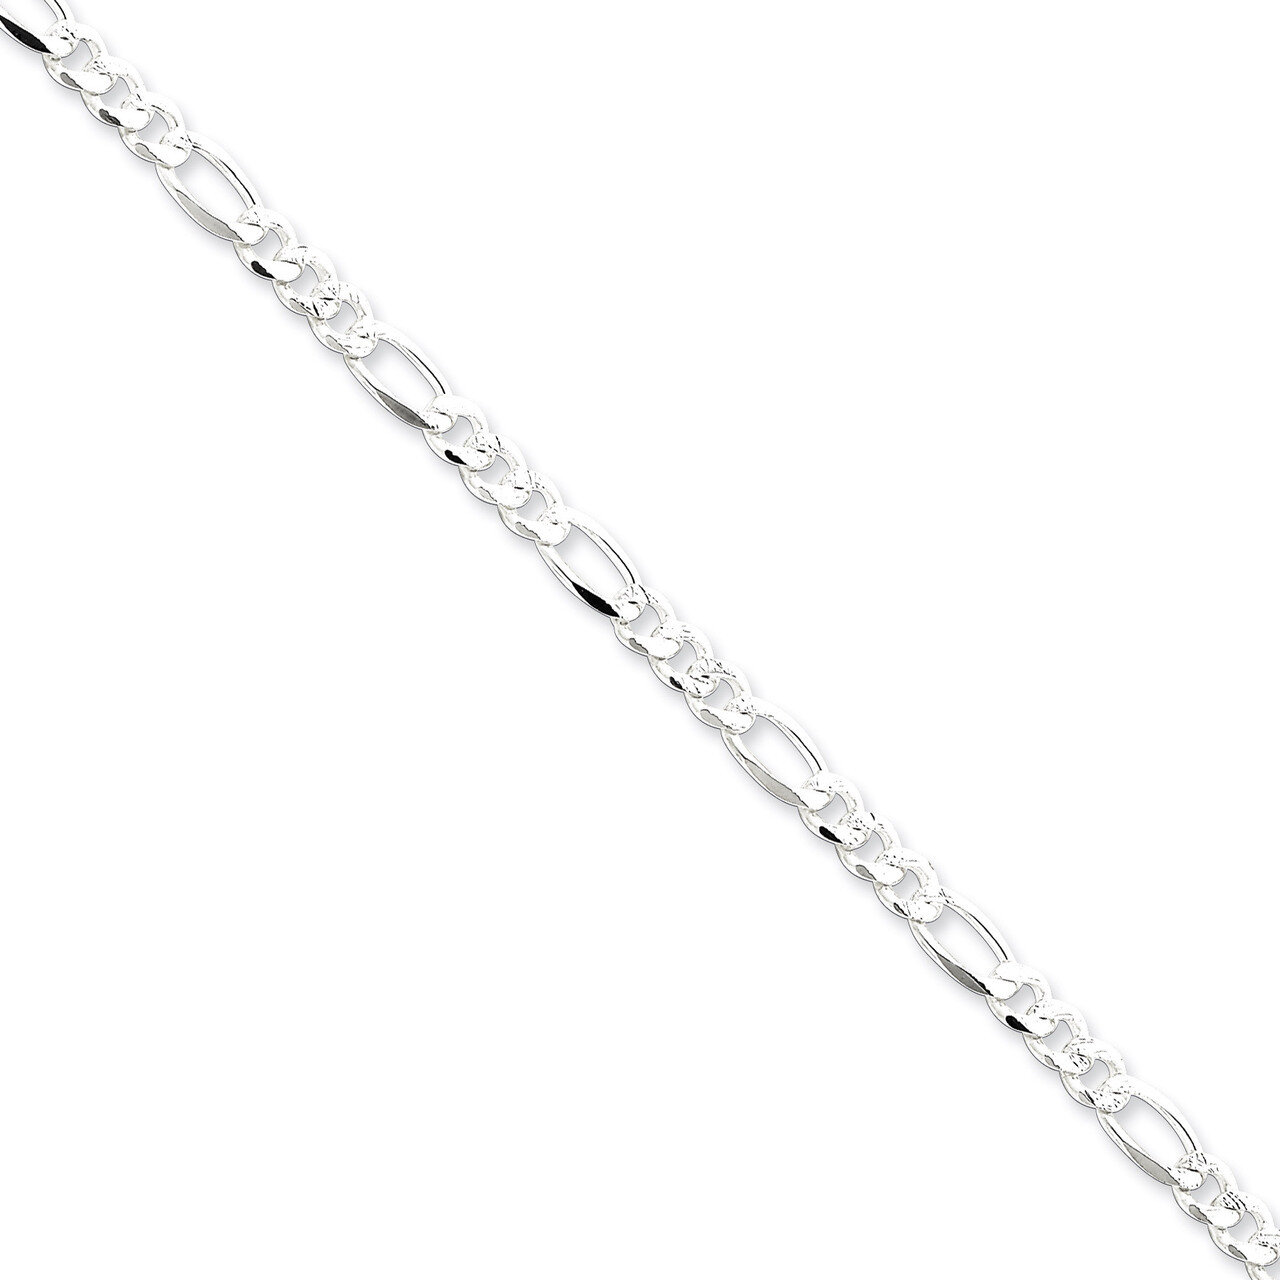 8 Inch 4.75mm Pave Flat Figaro Chain Sterling Silver QFF120-8